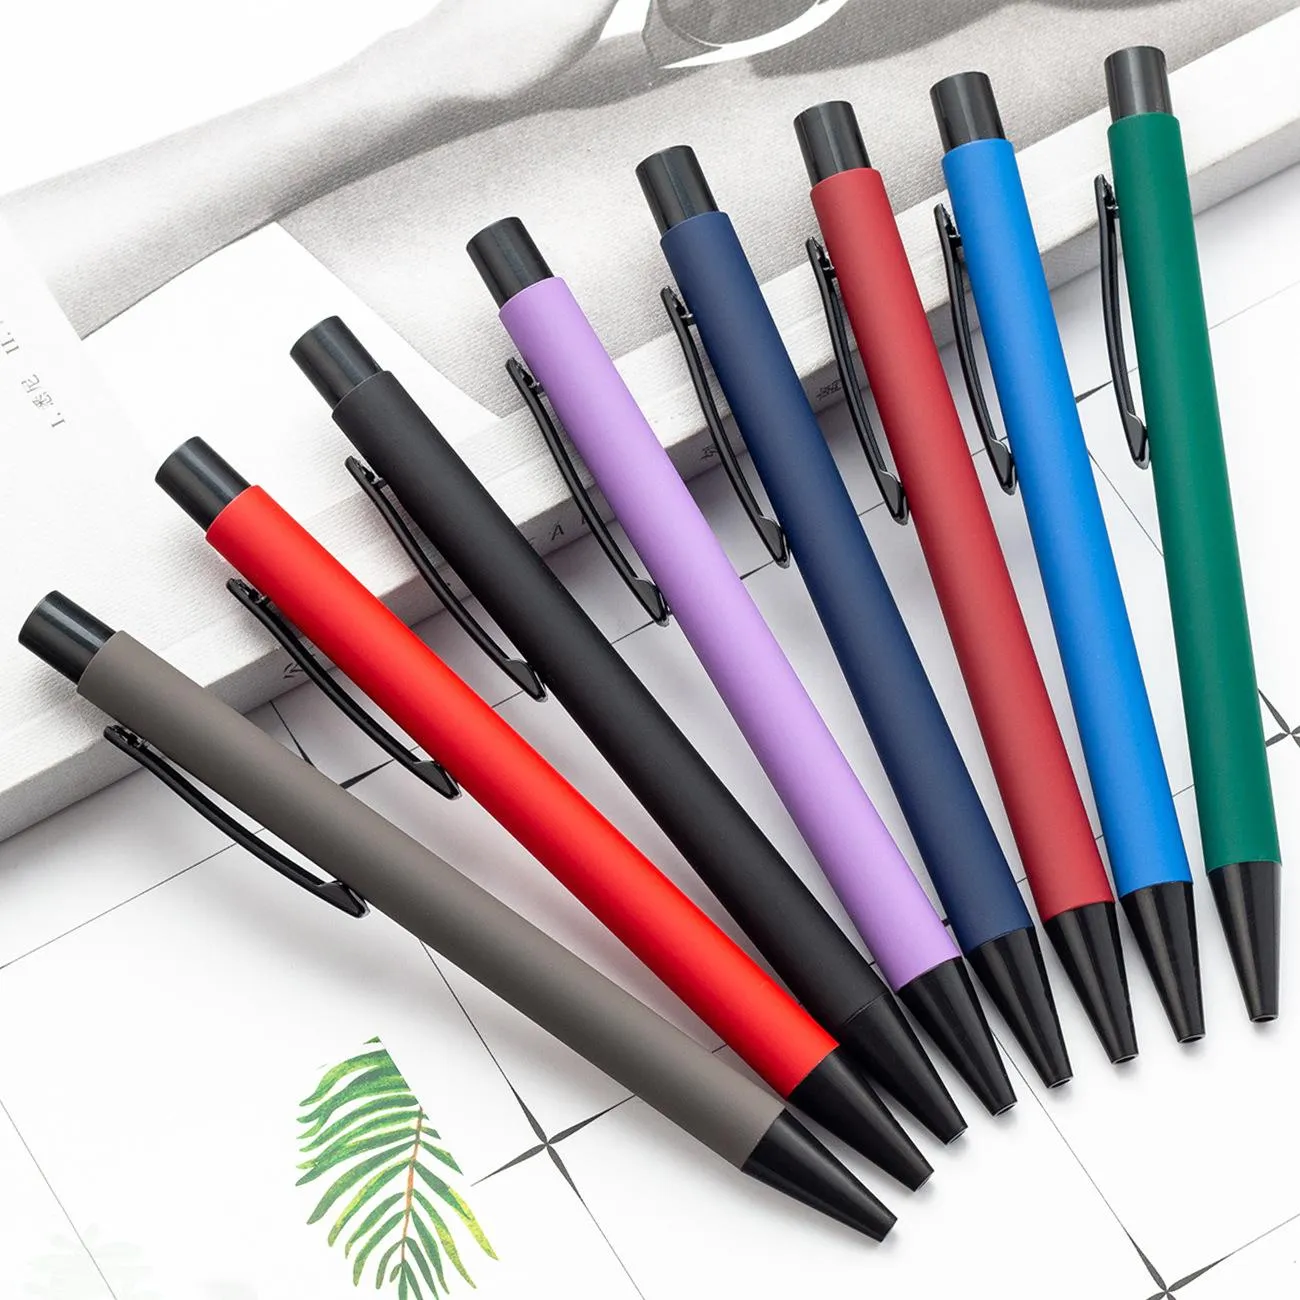 Press Aluminum Rod Ball Pen Metal Stationery School Students Write Exam Supplies Office Or Business Gifts Advertising Integral Redemption